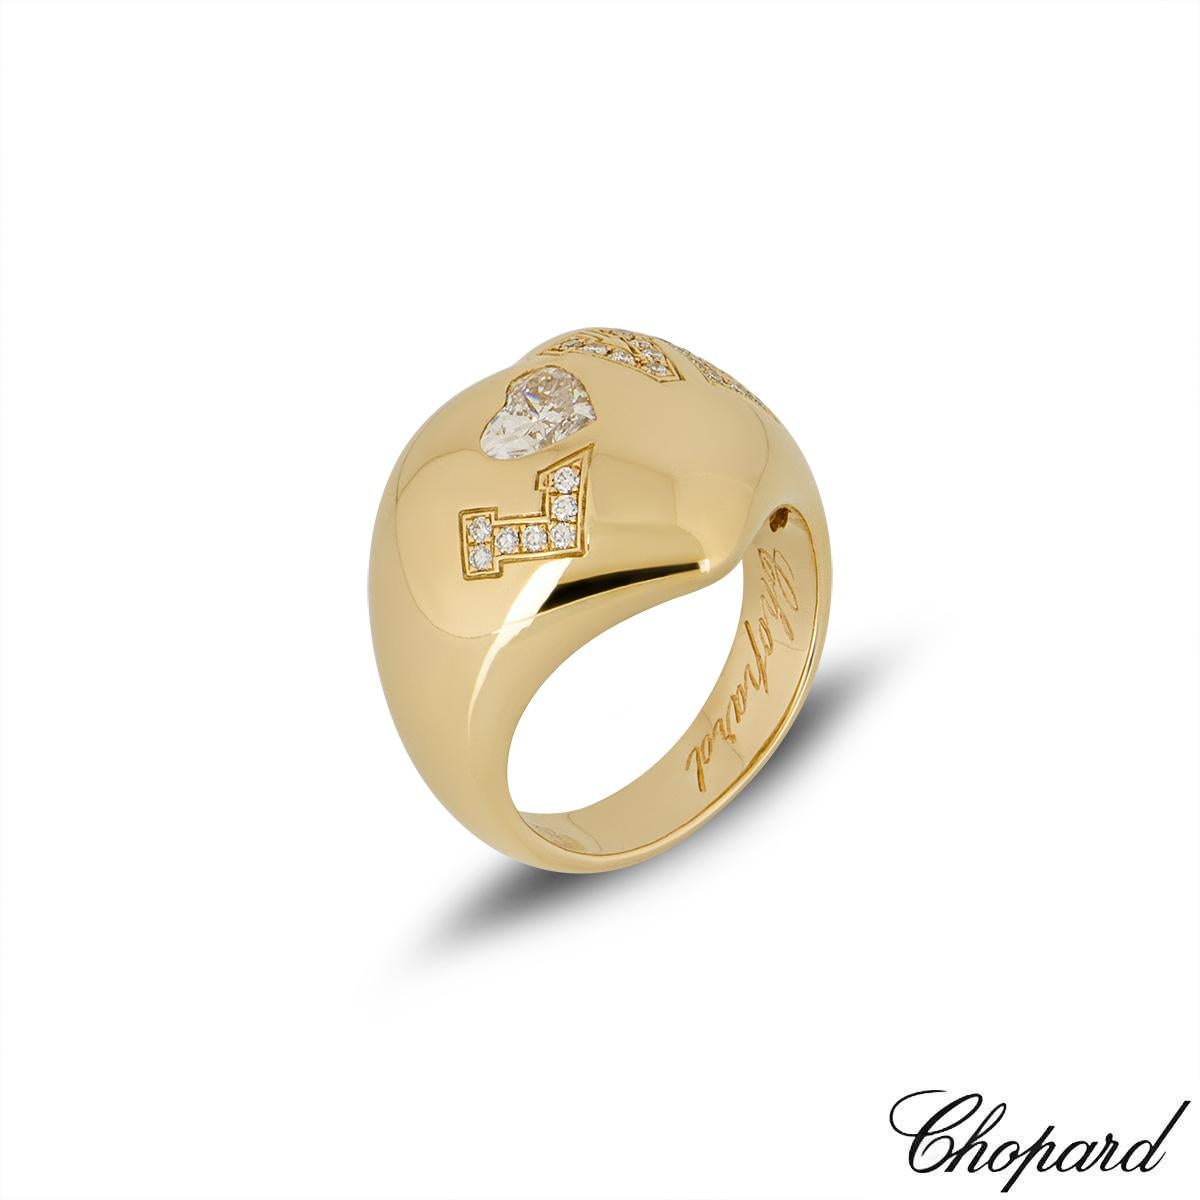 A Chopard 18k yellow gold diamond heart shape ring . 'Love' is spelt out in 23 pave set in diamonds totalling 0.16ct and a heart shape diamond totalling 0.52ct. The ring is currently a size UK N / EU 53 / US 6 1/2 but can be adjusted for the perfect